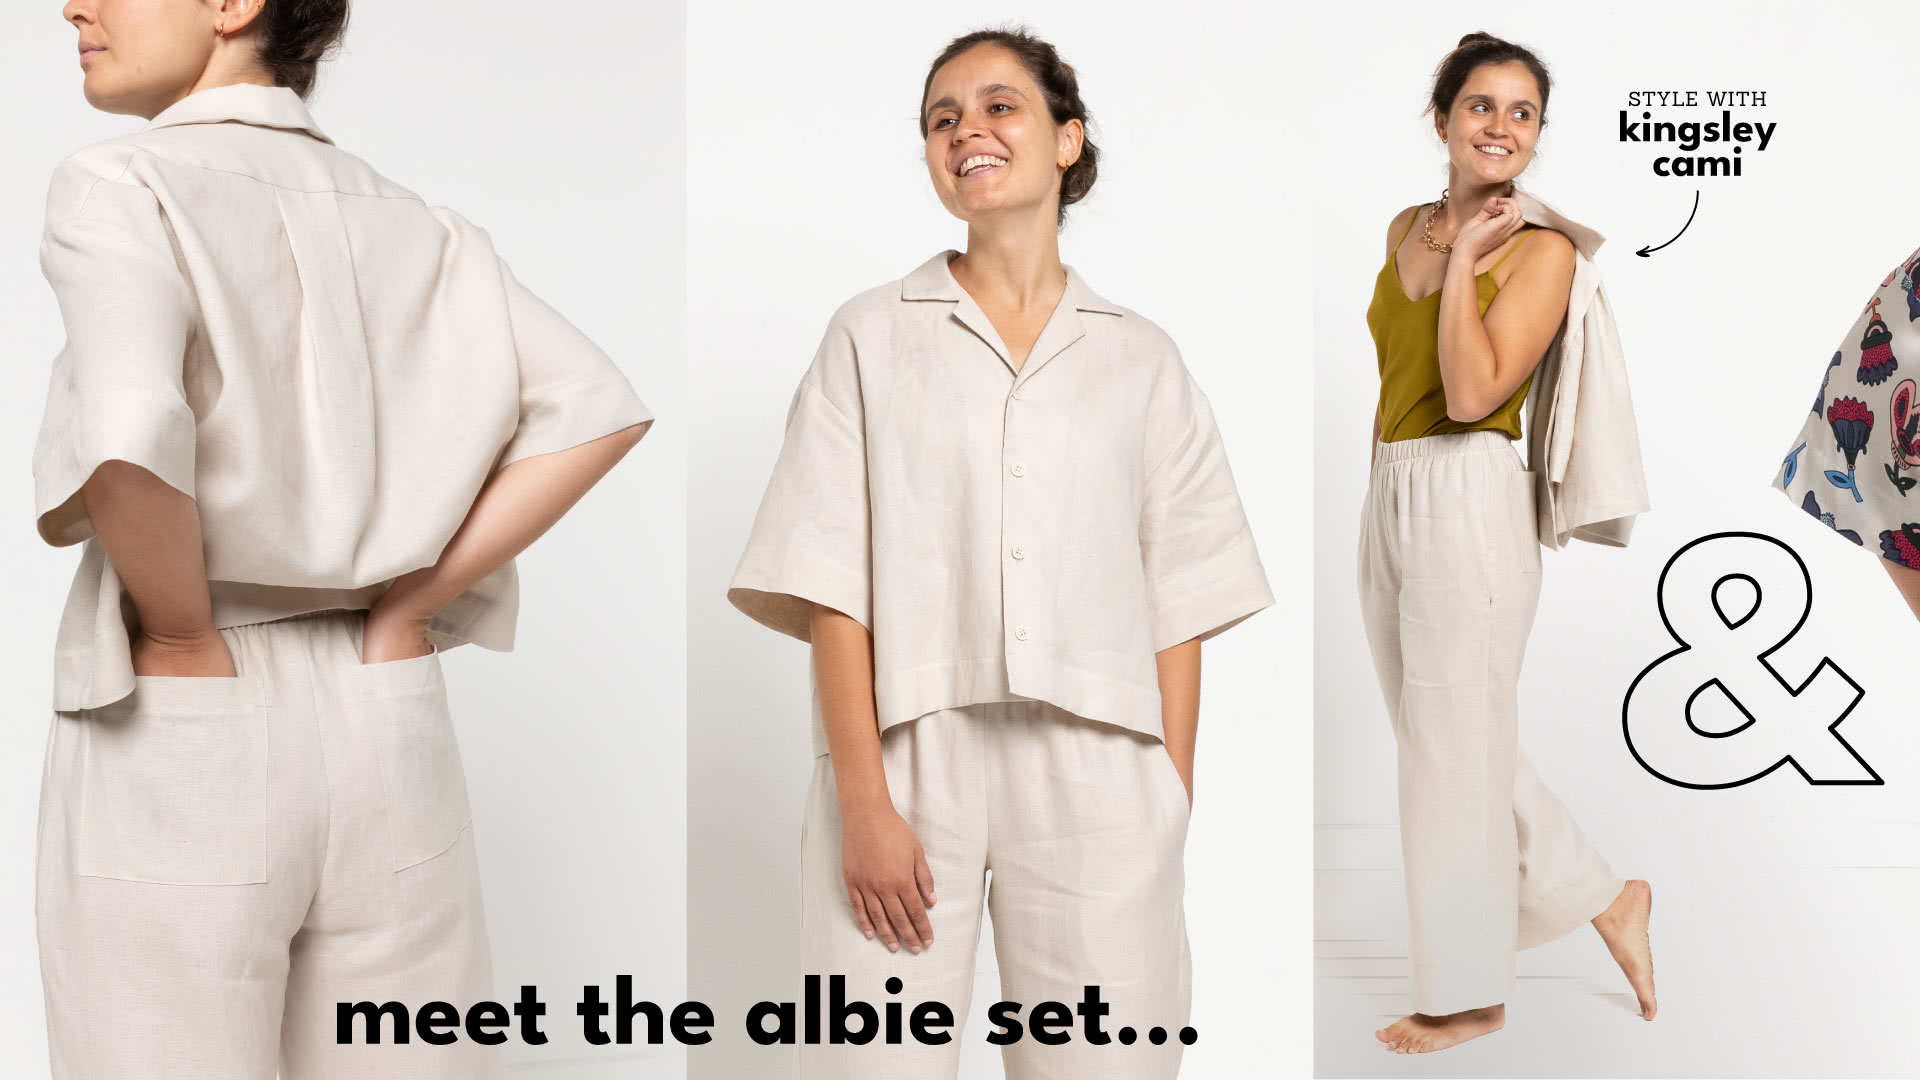 Sewing patterns that fit – Style Arc